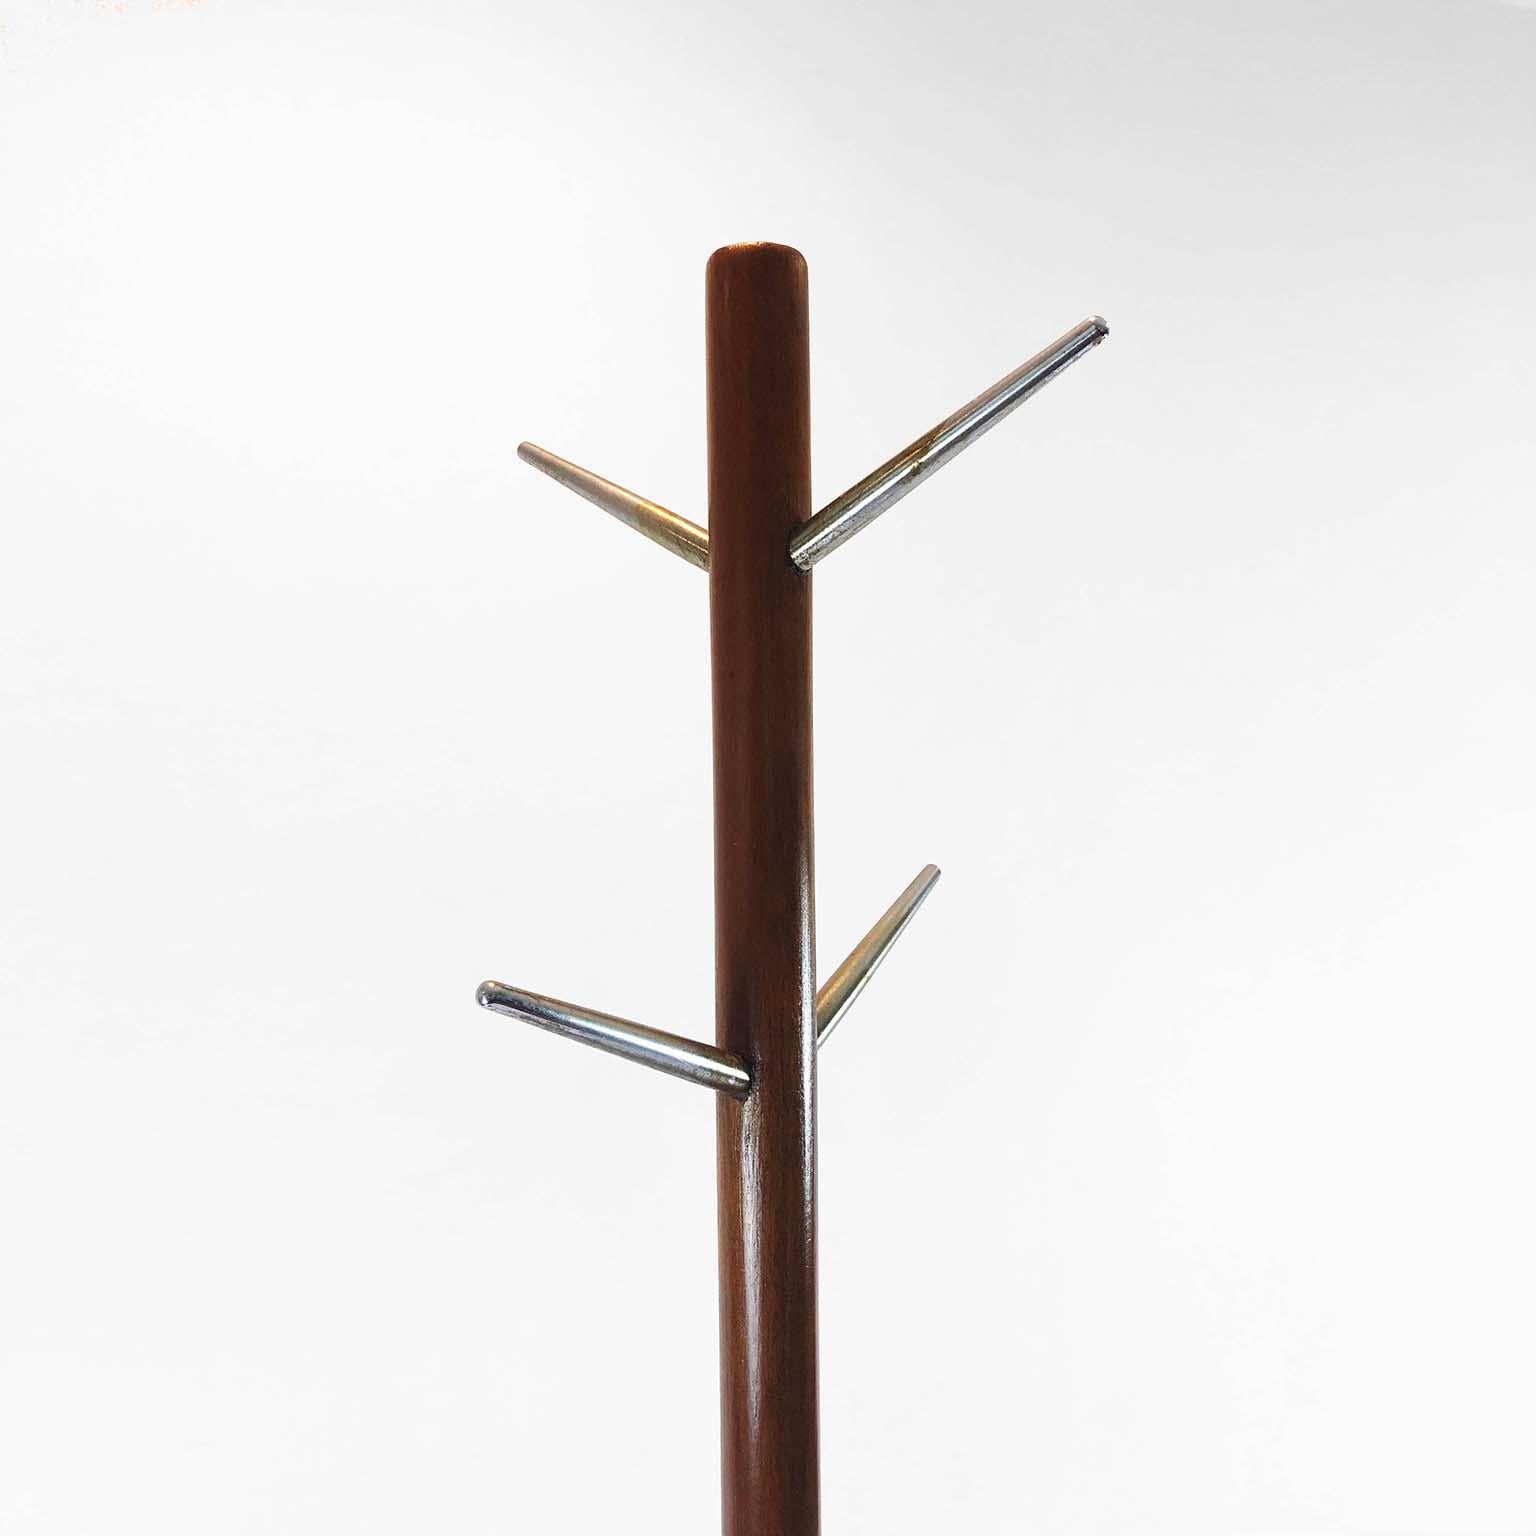 Designed by IRGSA (Industrias Ruíz Galindo), circa 1960. We offer this wonderful Mid-Century Modern coat rack. The coatrack is sculptural enough it can be put in nearly any environment and still hold it's own.